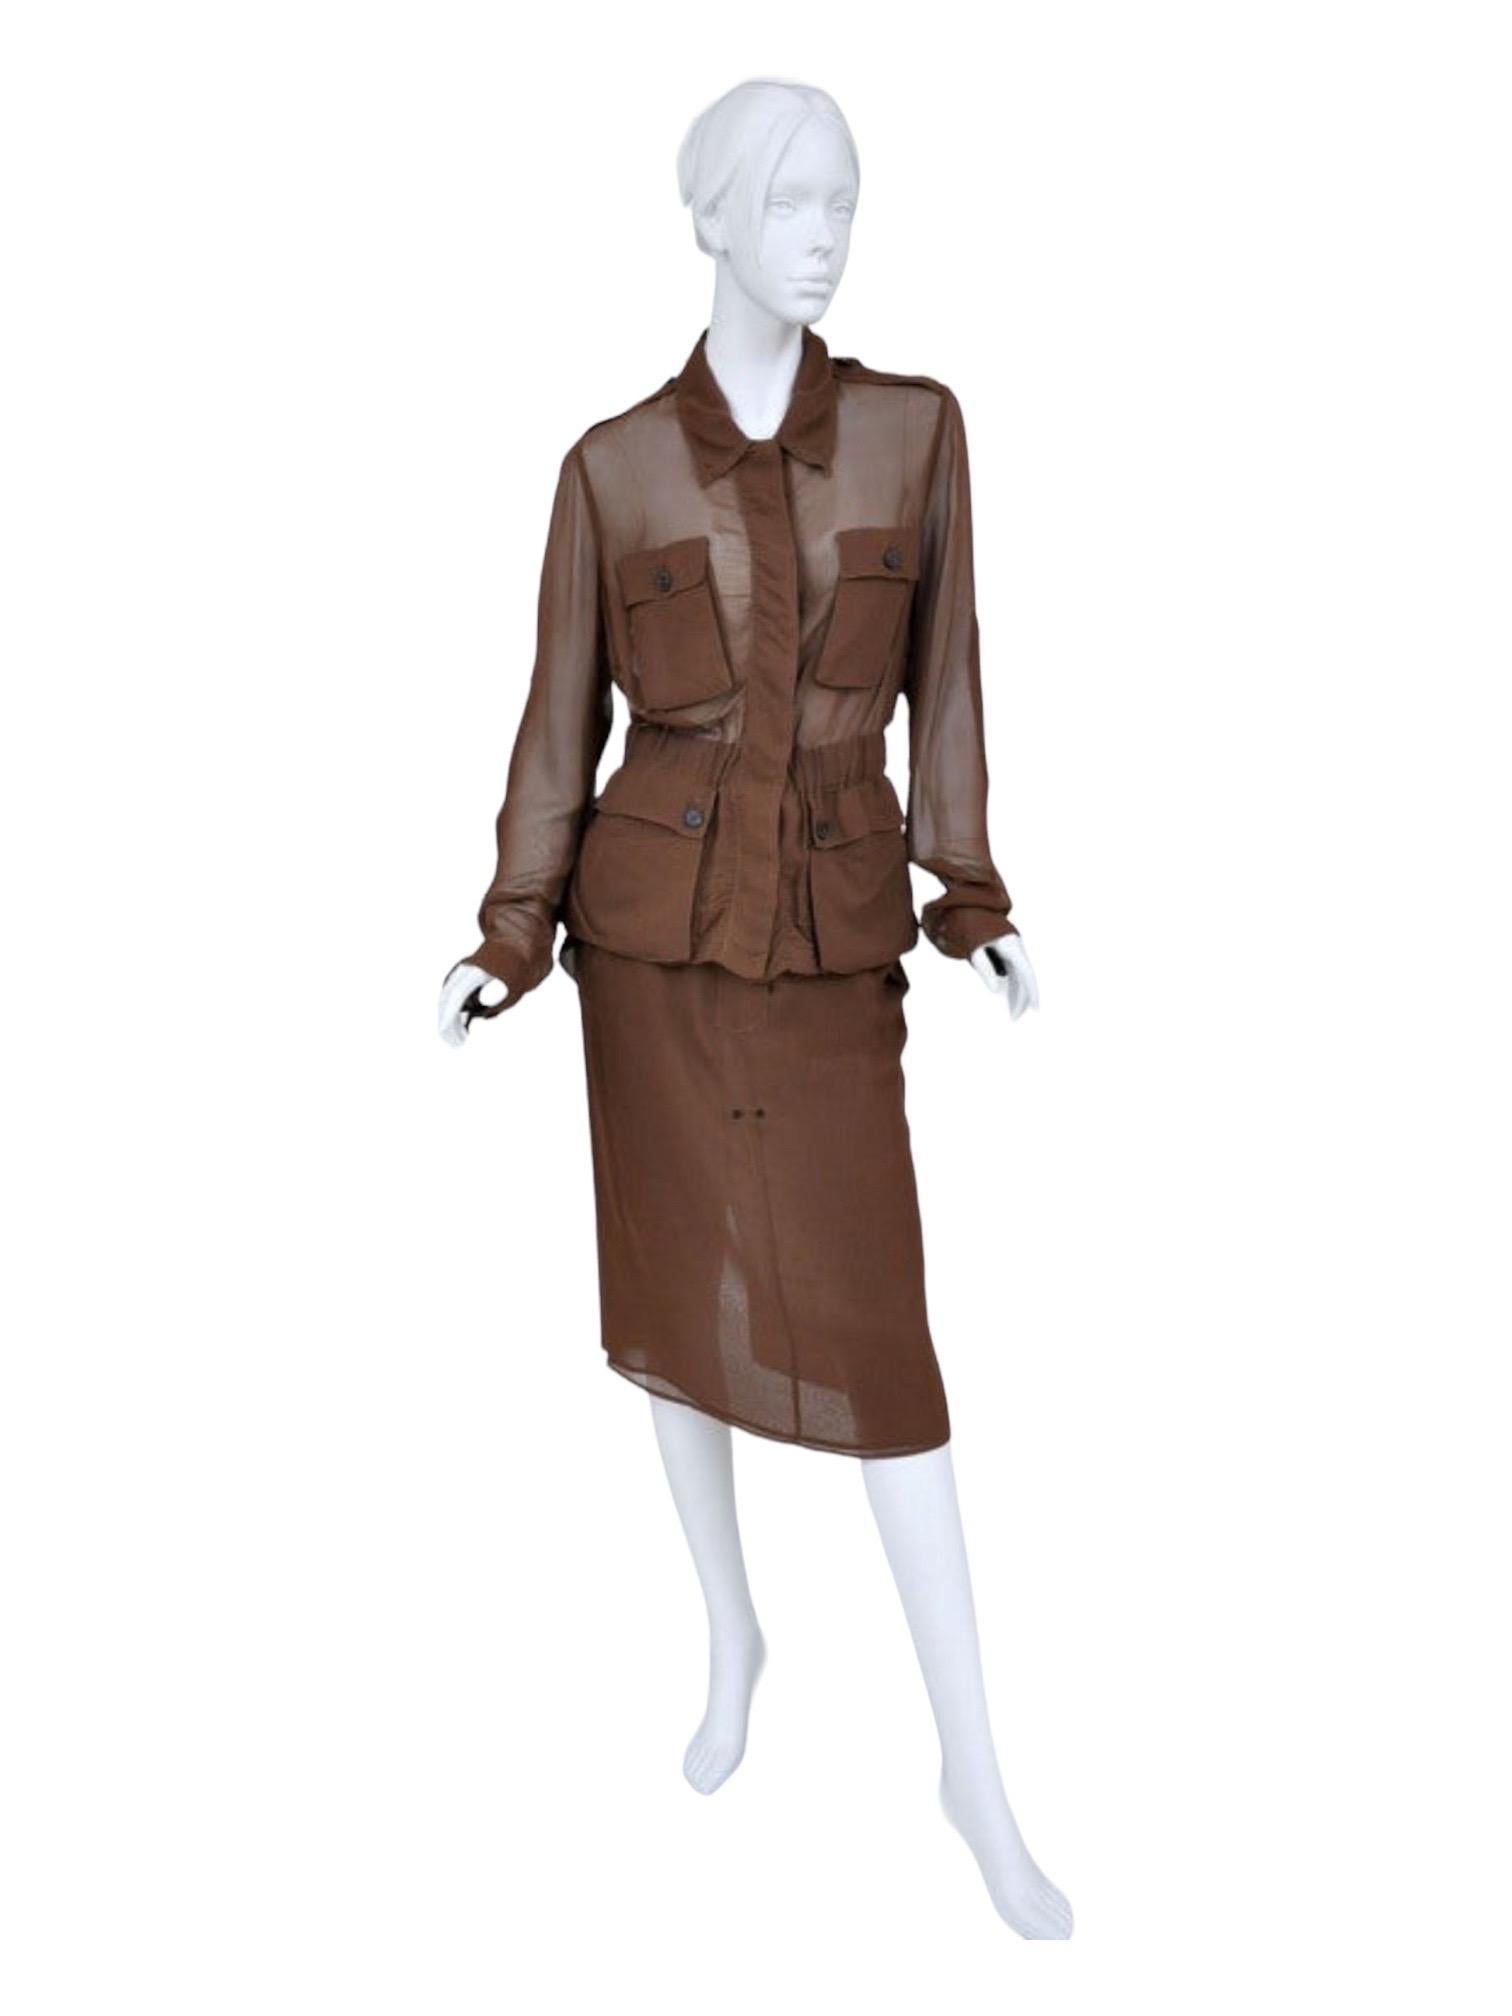 S/S 2002 Vintage Tom Ford for Yves Saint Laurent cognac silk safari suit In Excellent Condition For Sale In Montgomery, TX